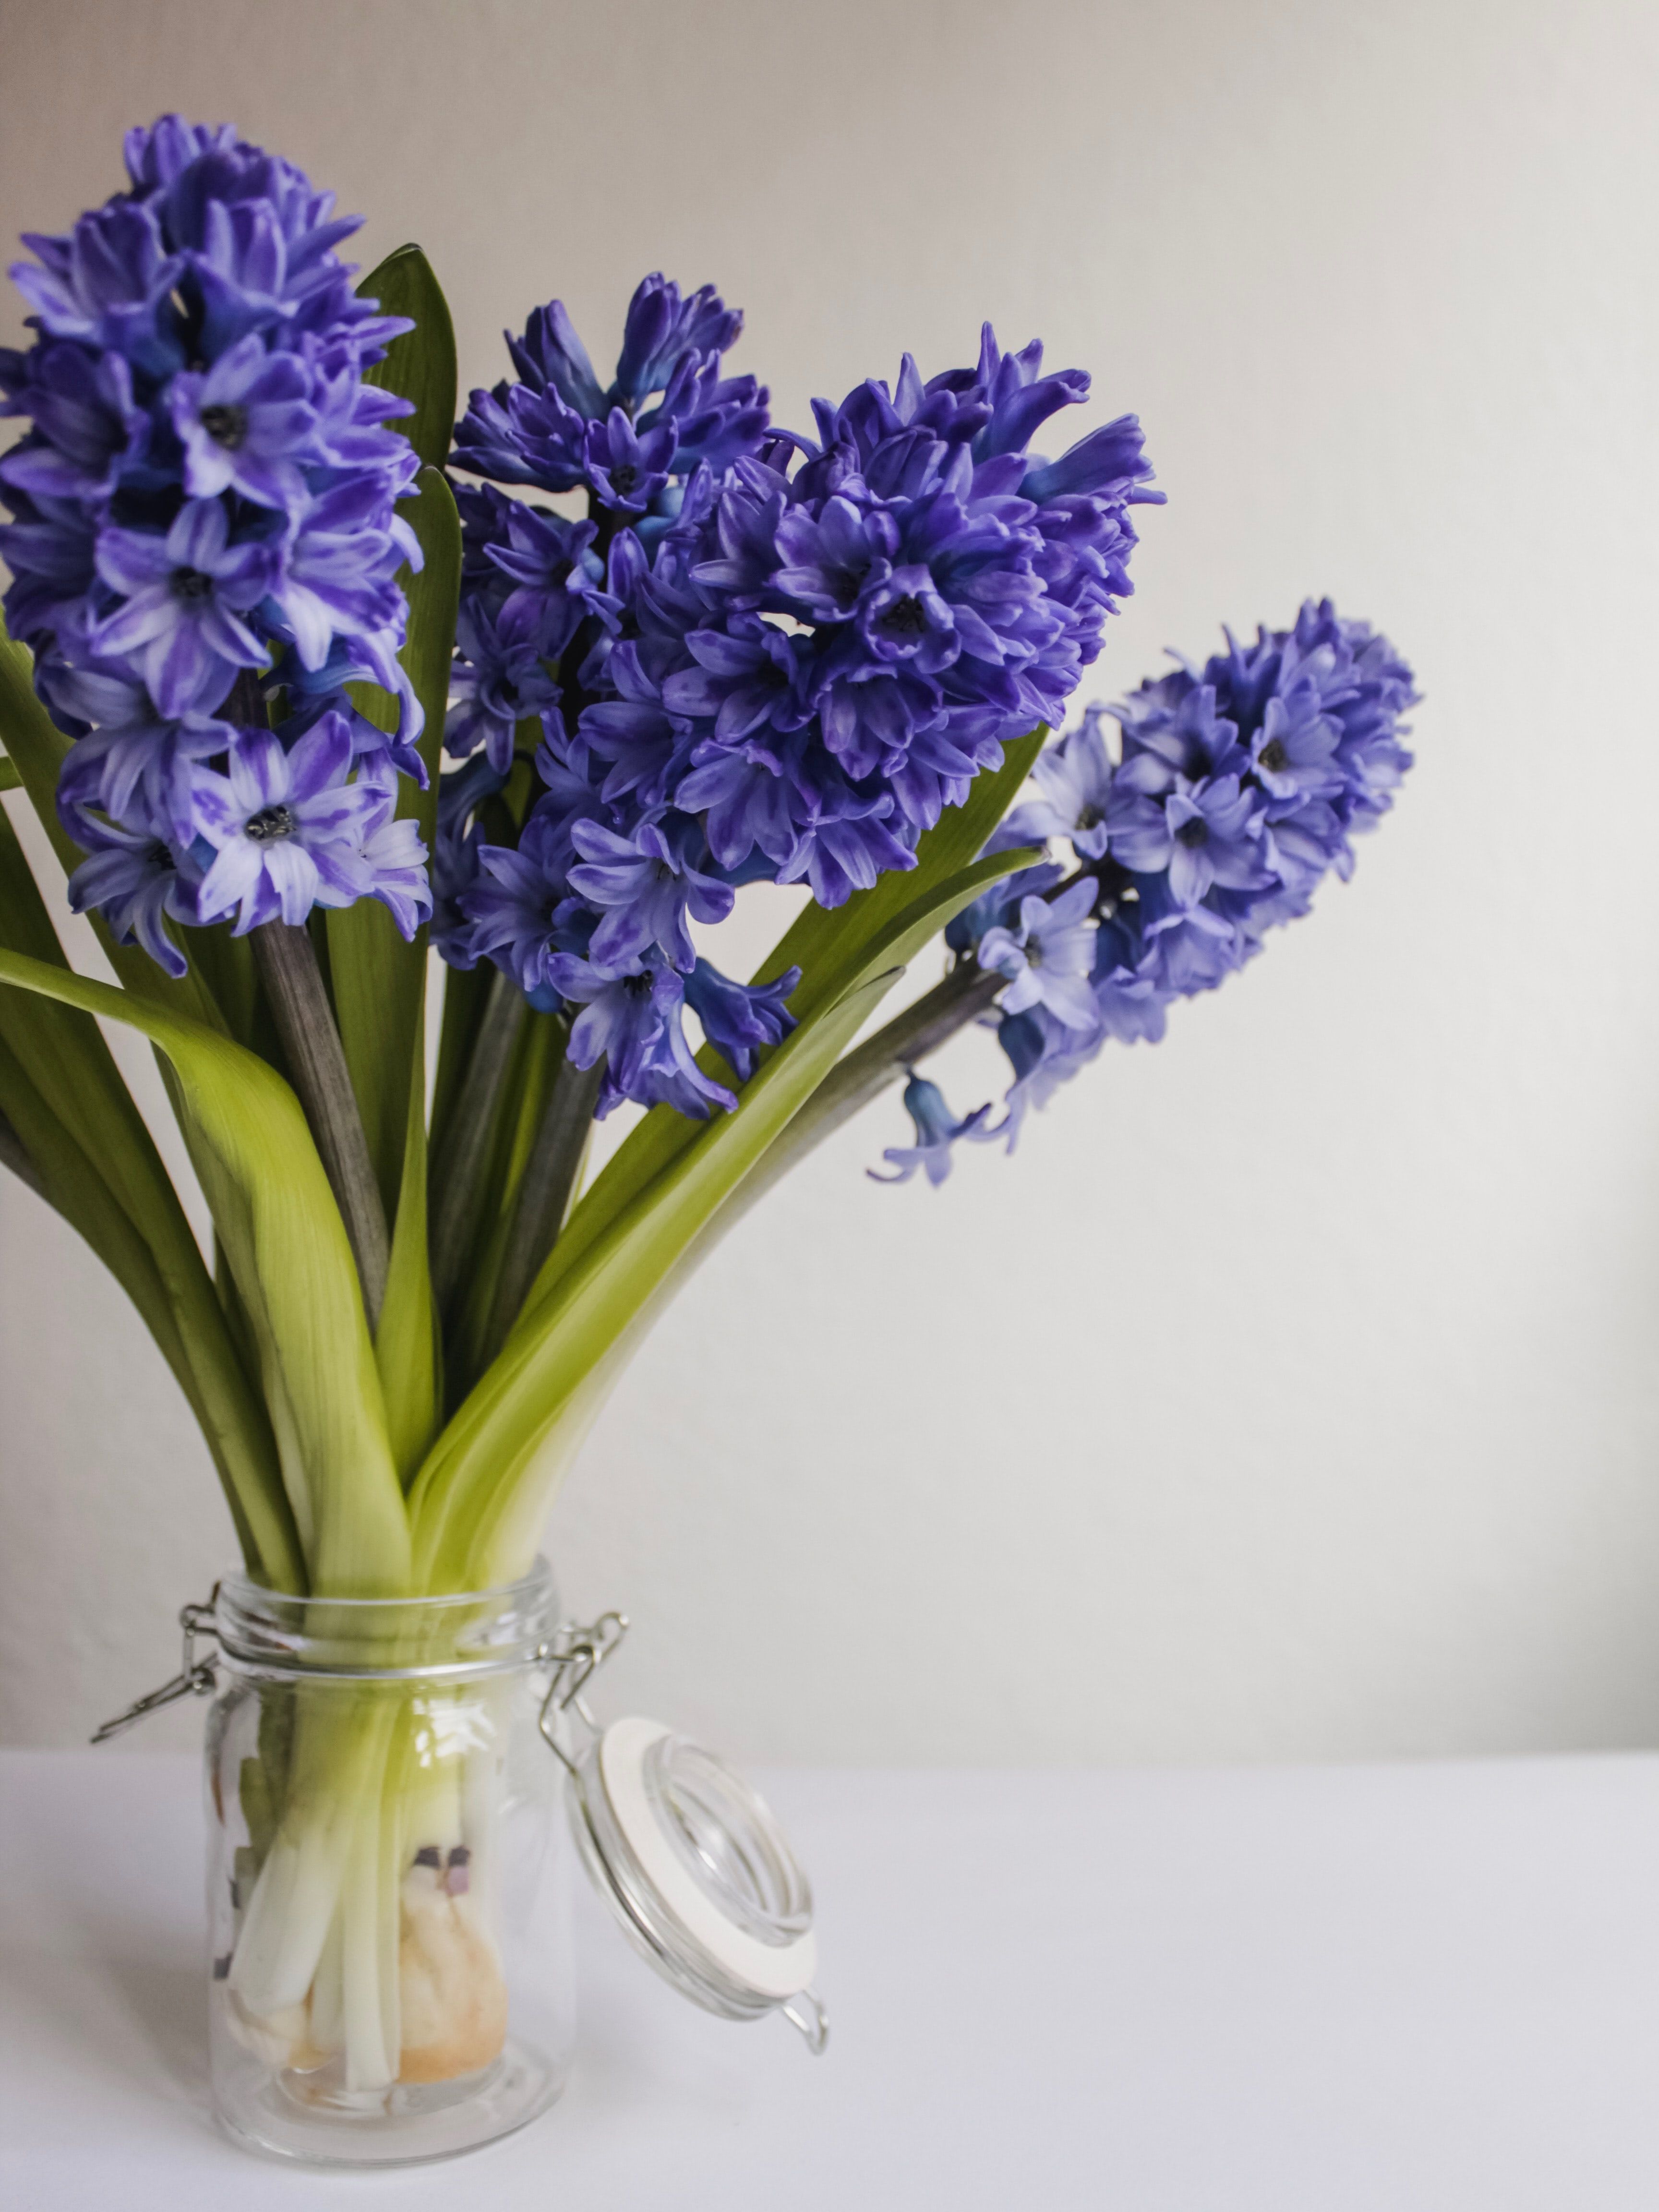 purple hyacinth flower in clear glass vase on table photo